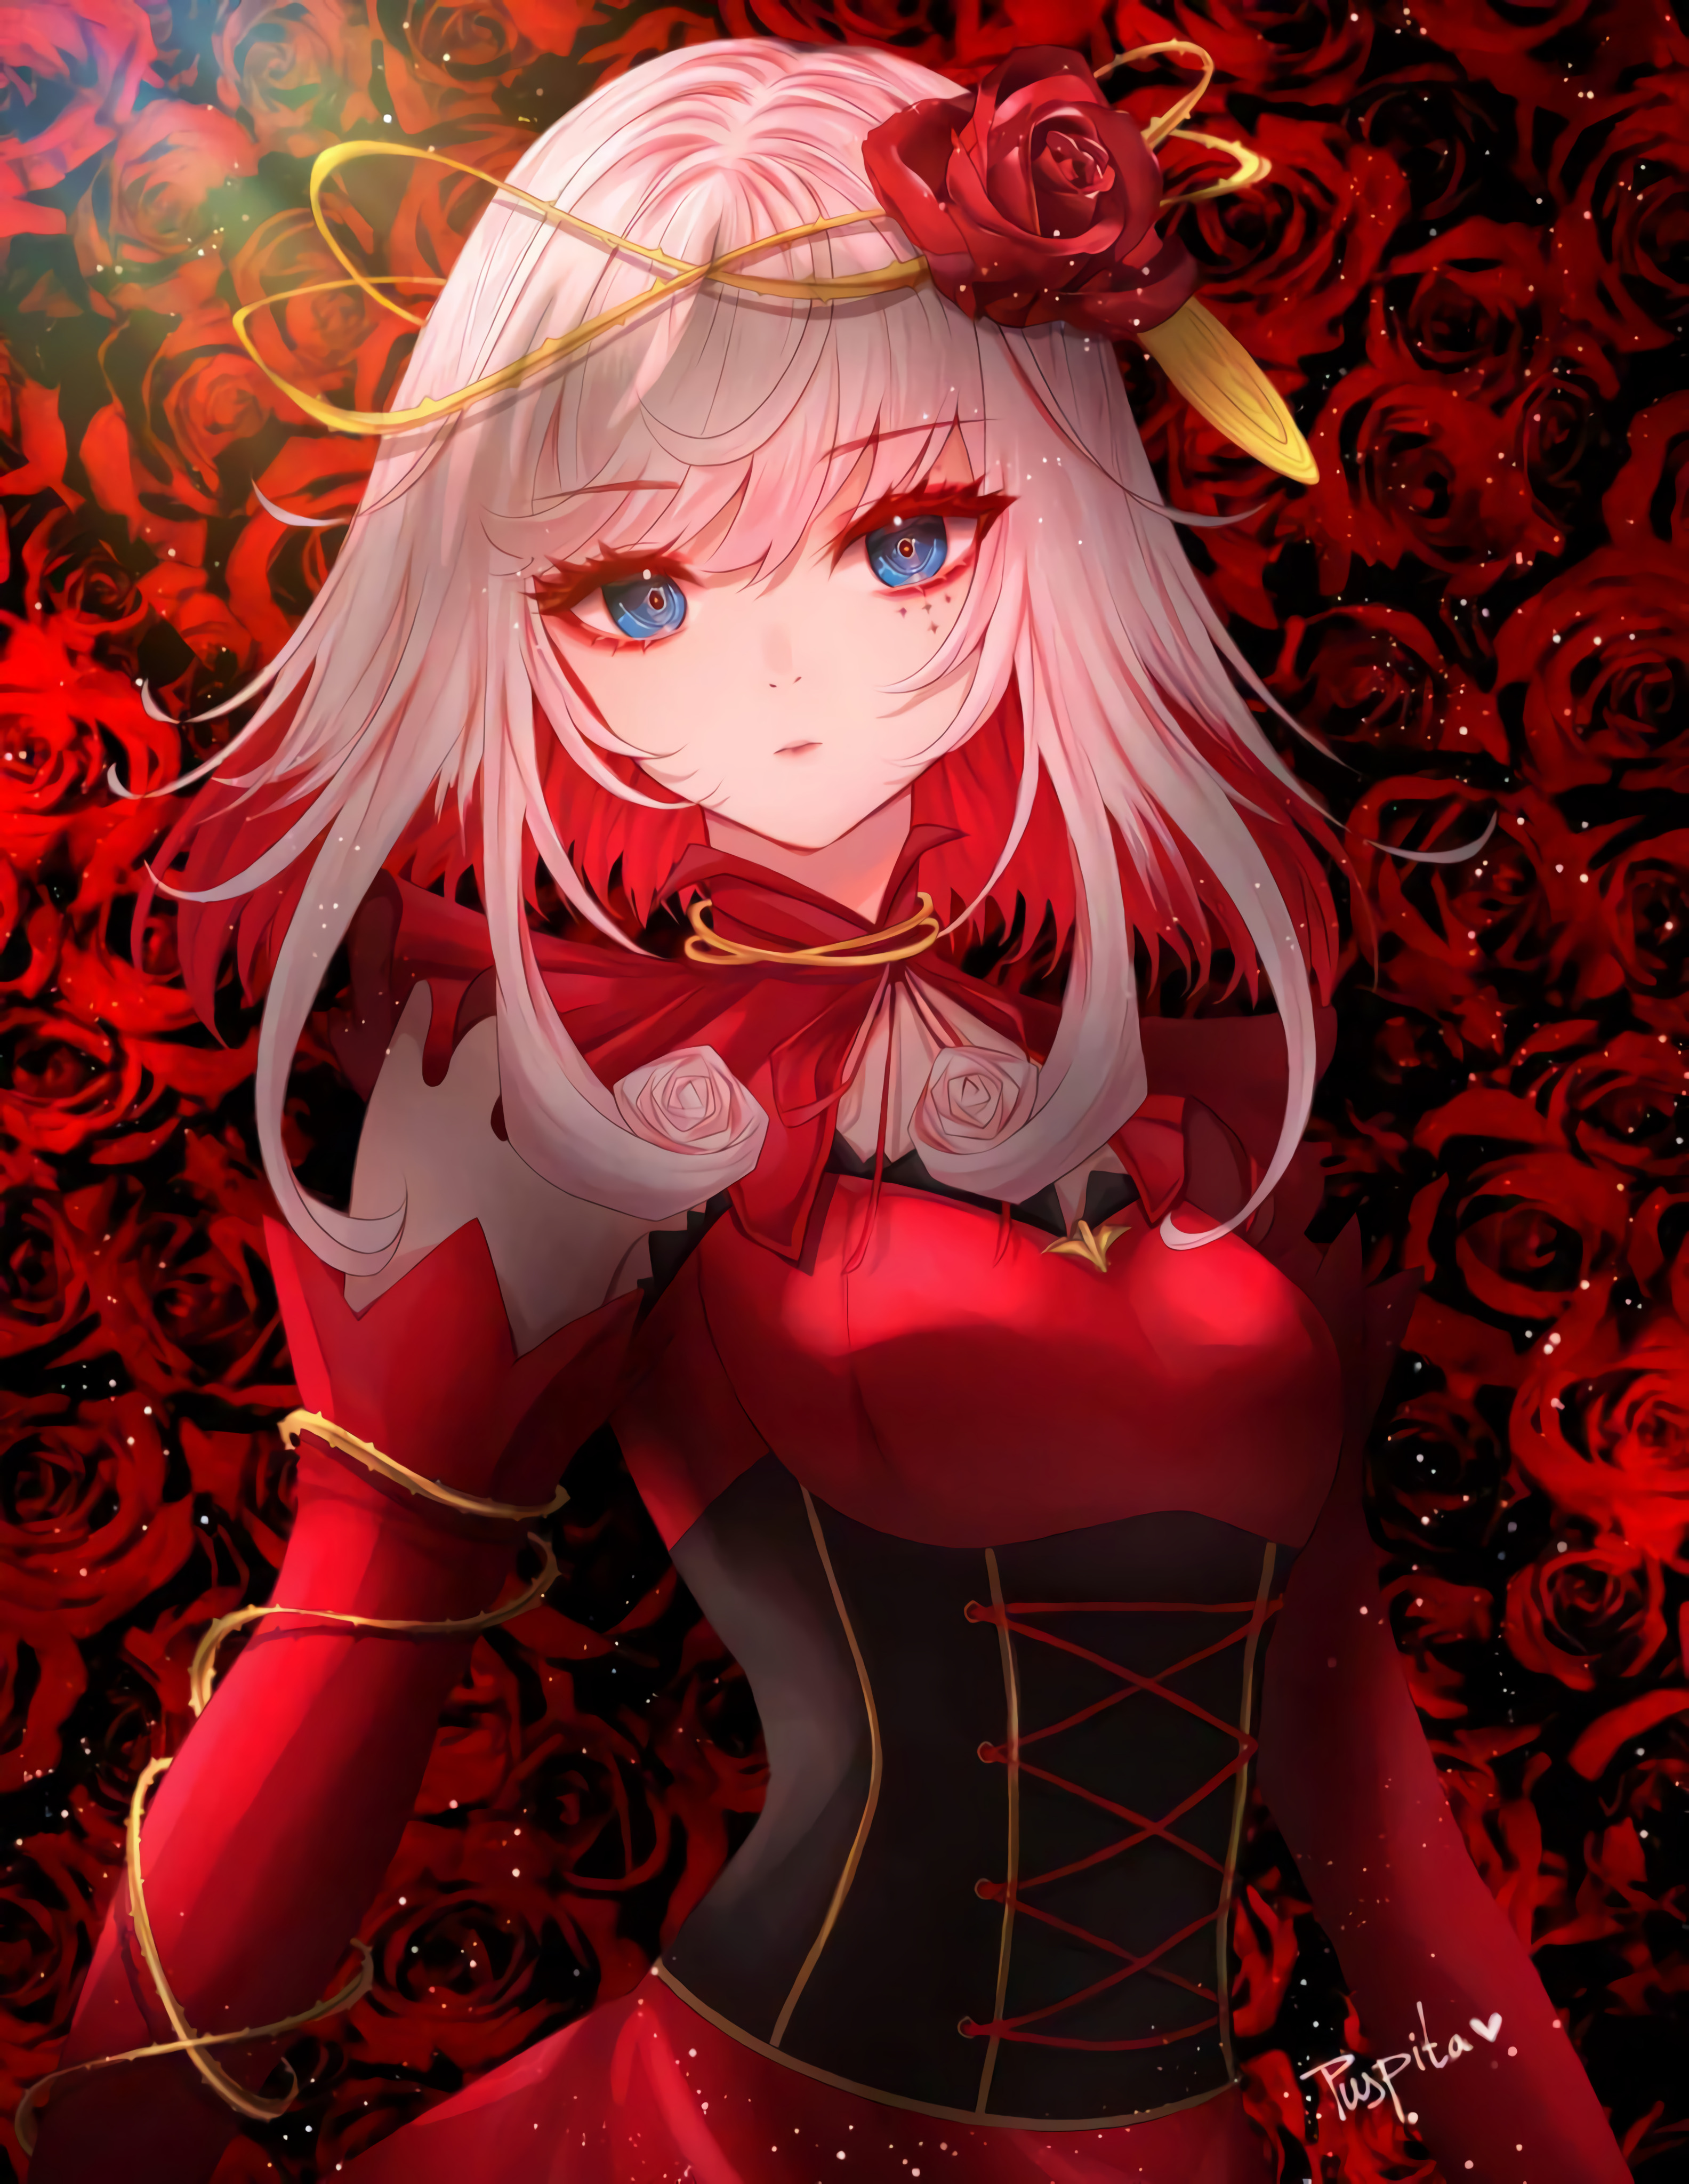 Anime 3168x4096 Takt Op. Destiny anime girls anime blue eyes red red background red dress portrait display rose Cosette